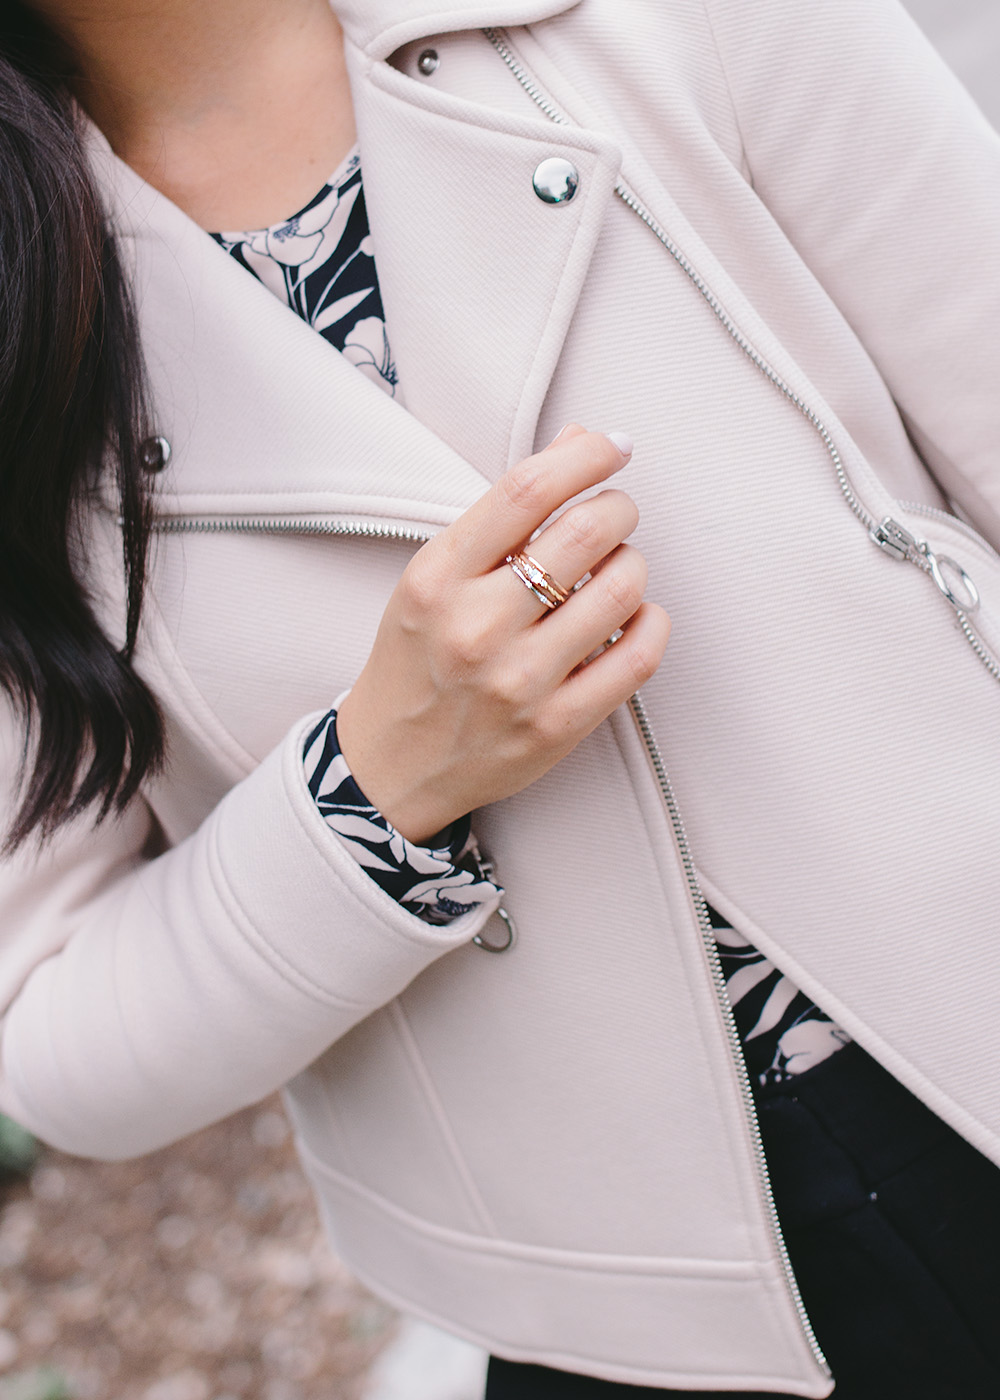 How to Wear Mixed Metal Jewelry